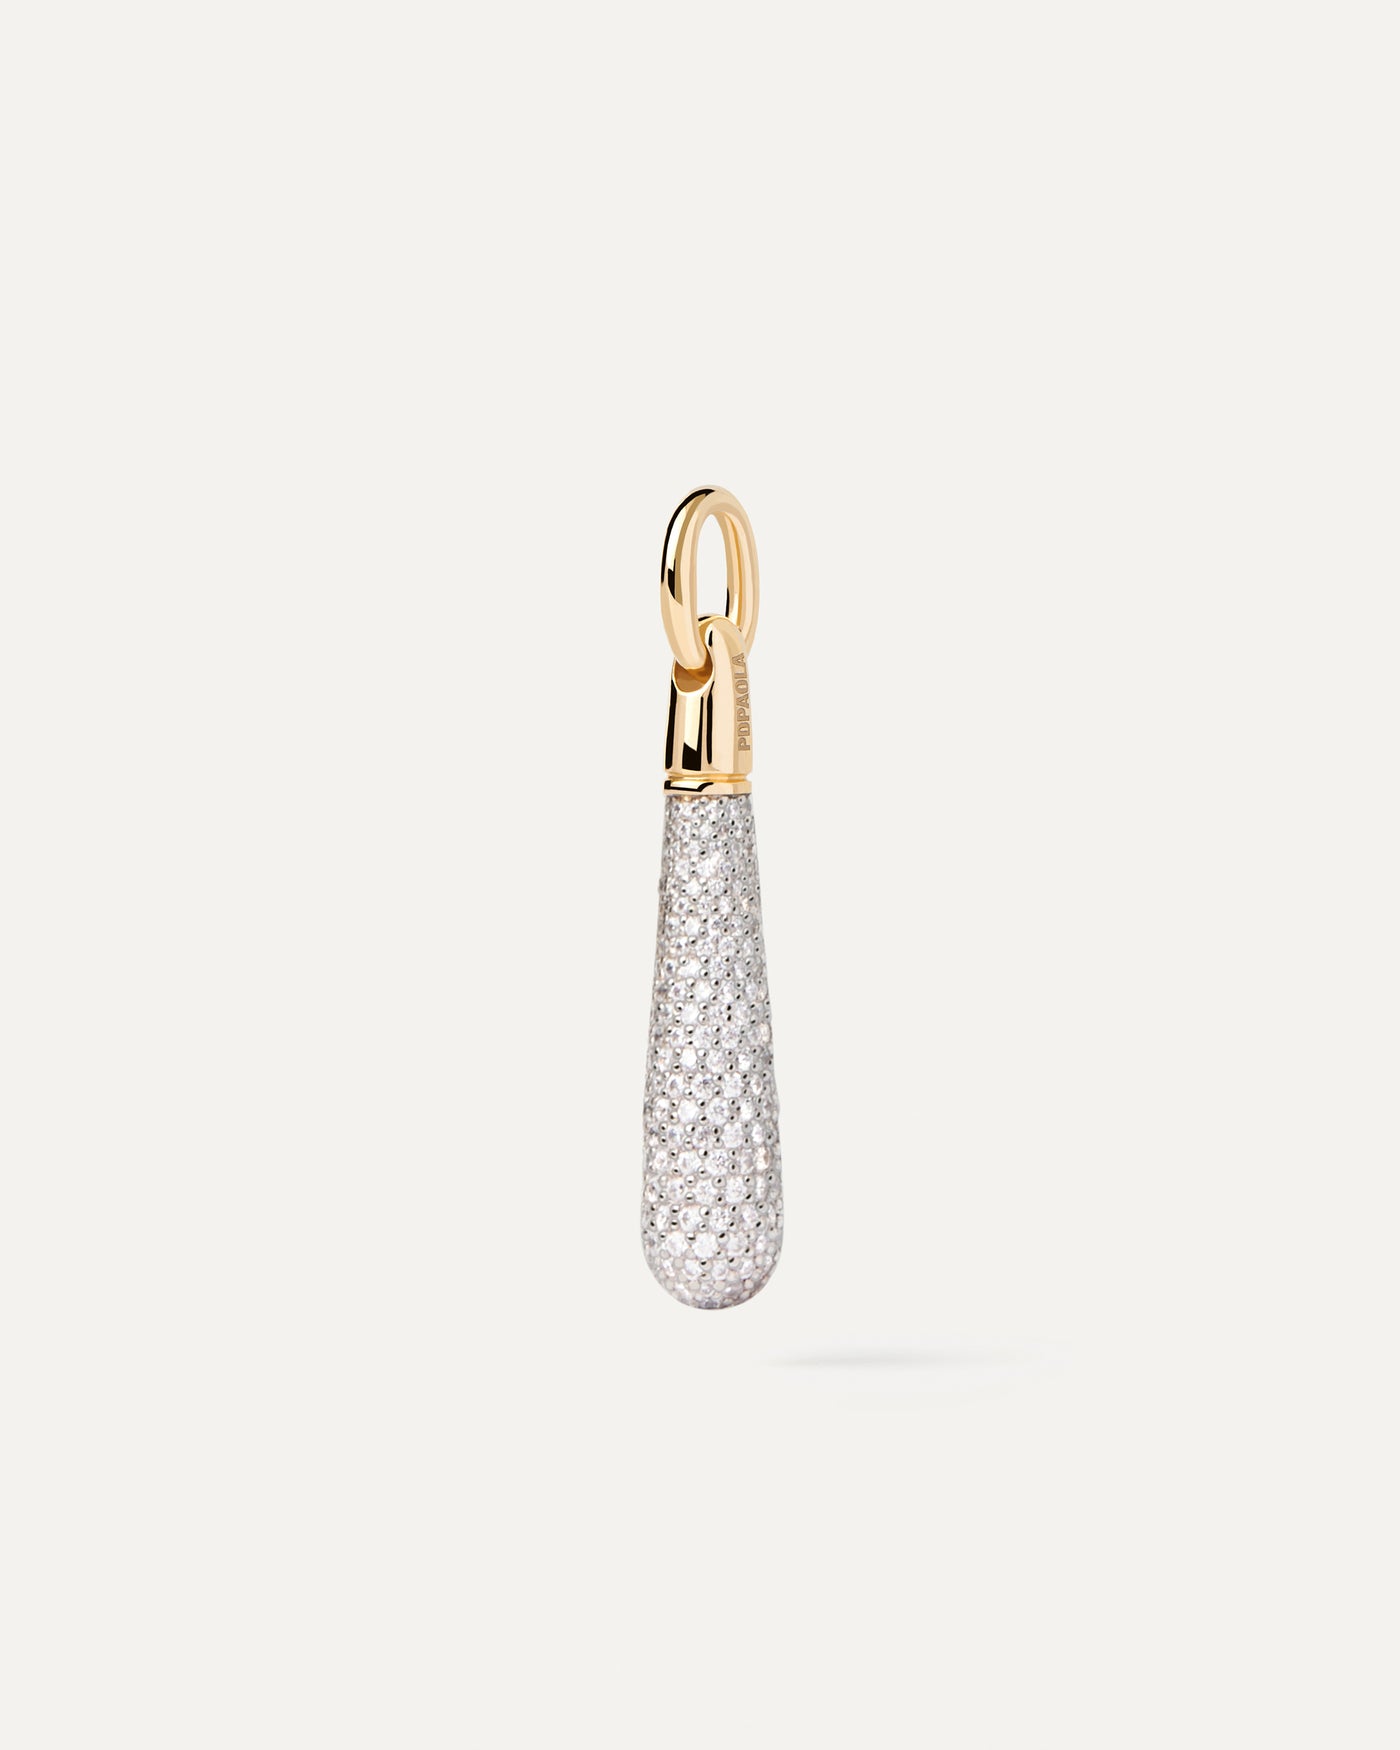 2023 Selection | Pavé Large Drop Pendant. Get the latest arrival from PDPAOLA. Place your order safely and get this Best Seller. Free Shipping.